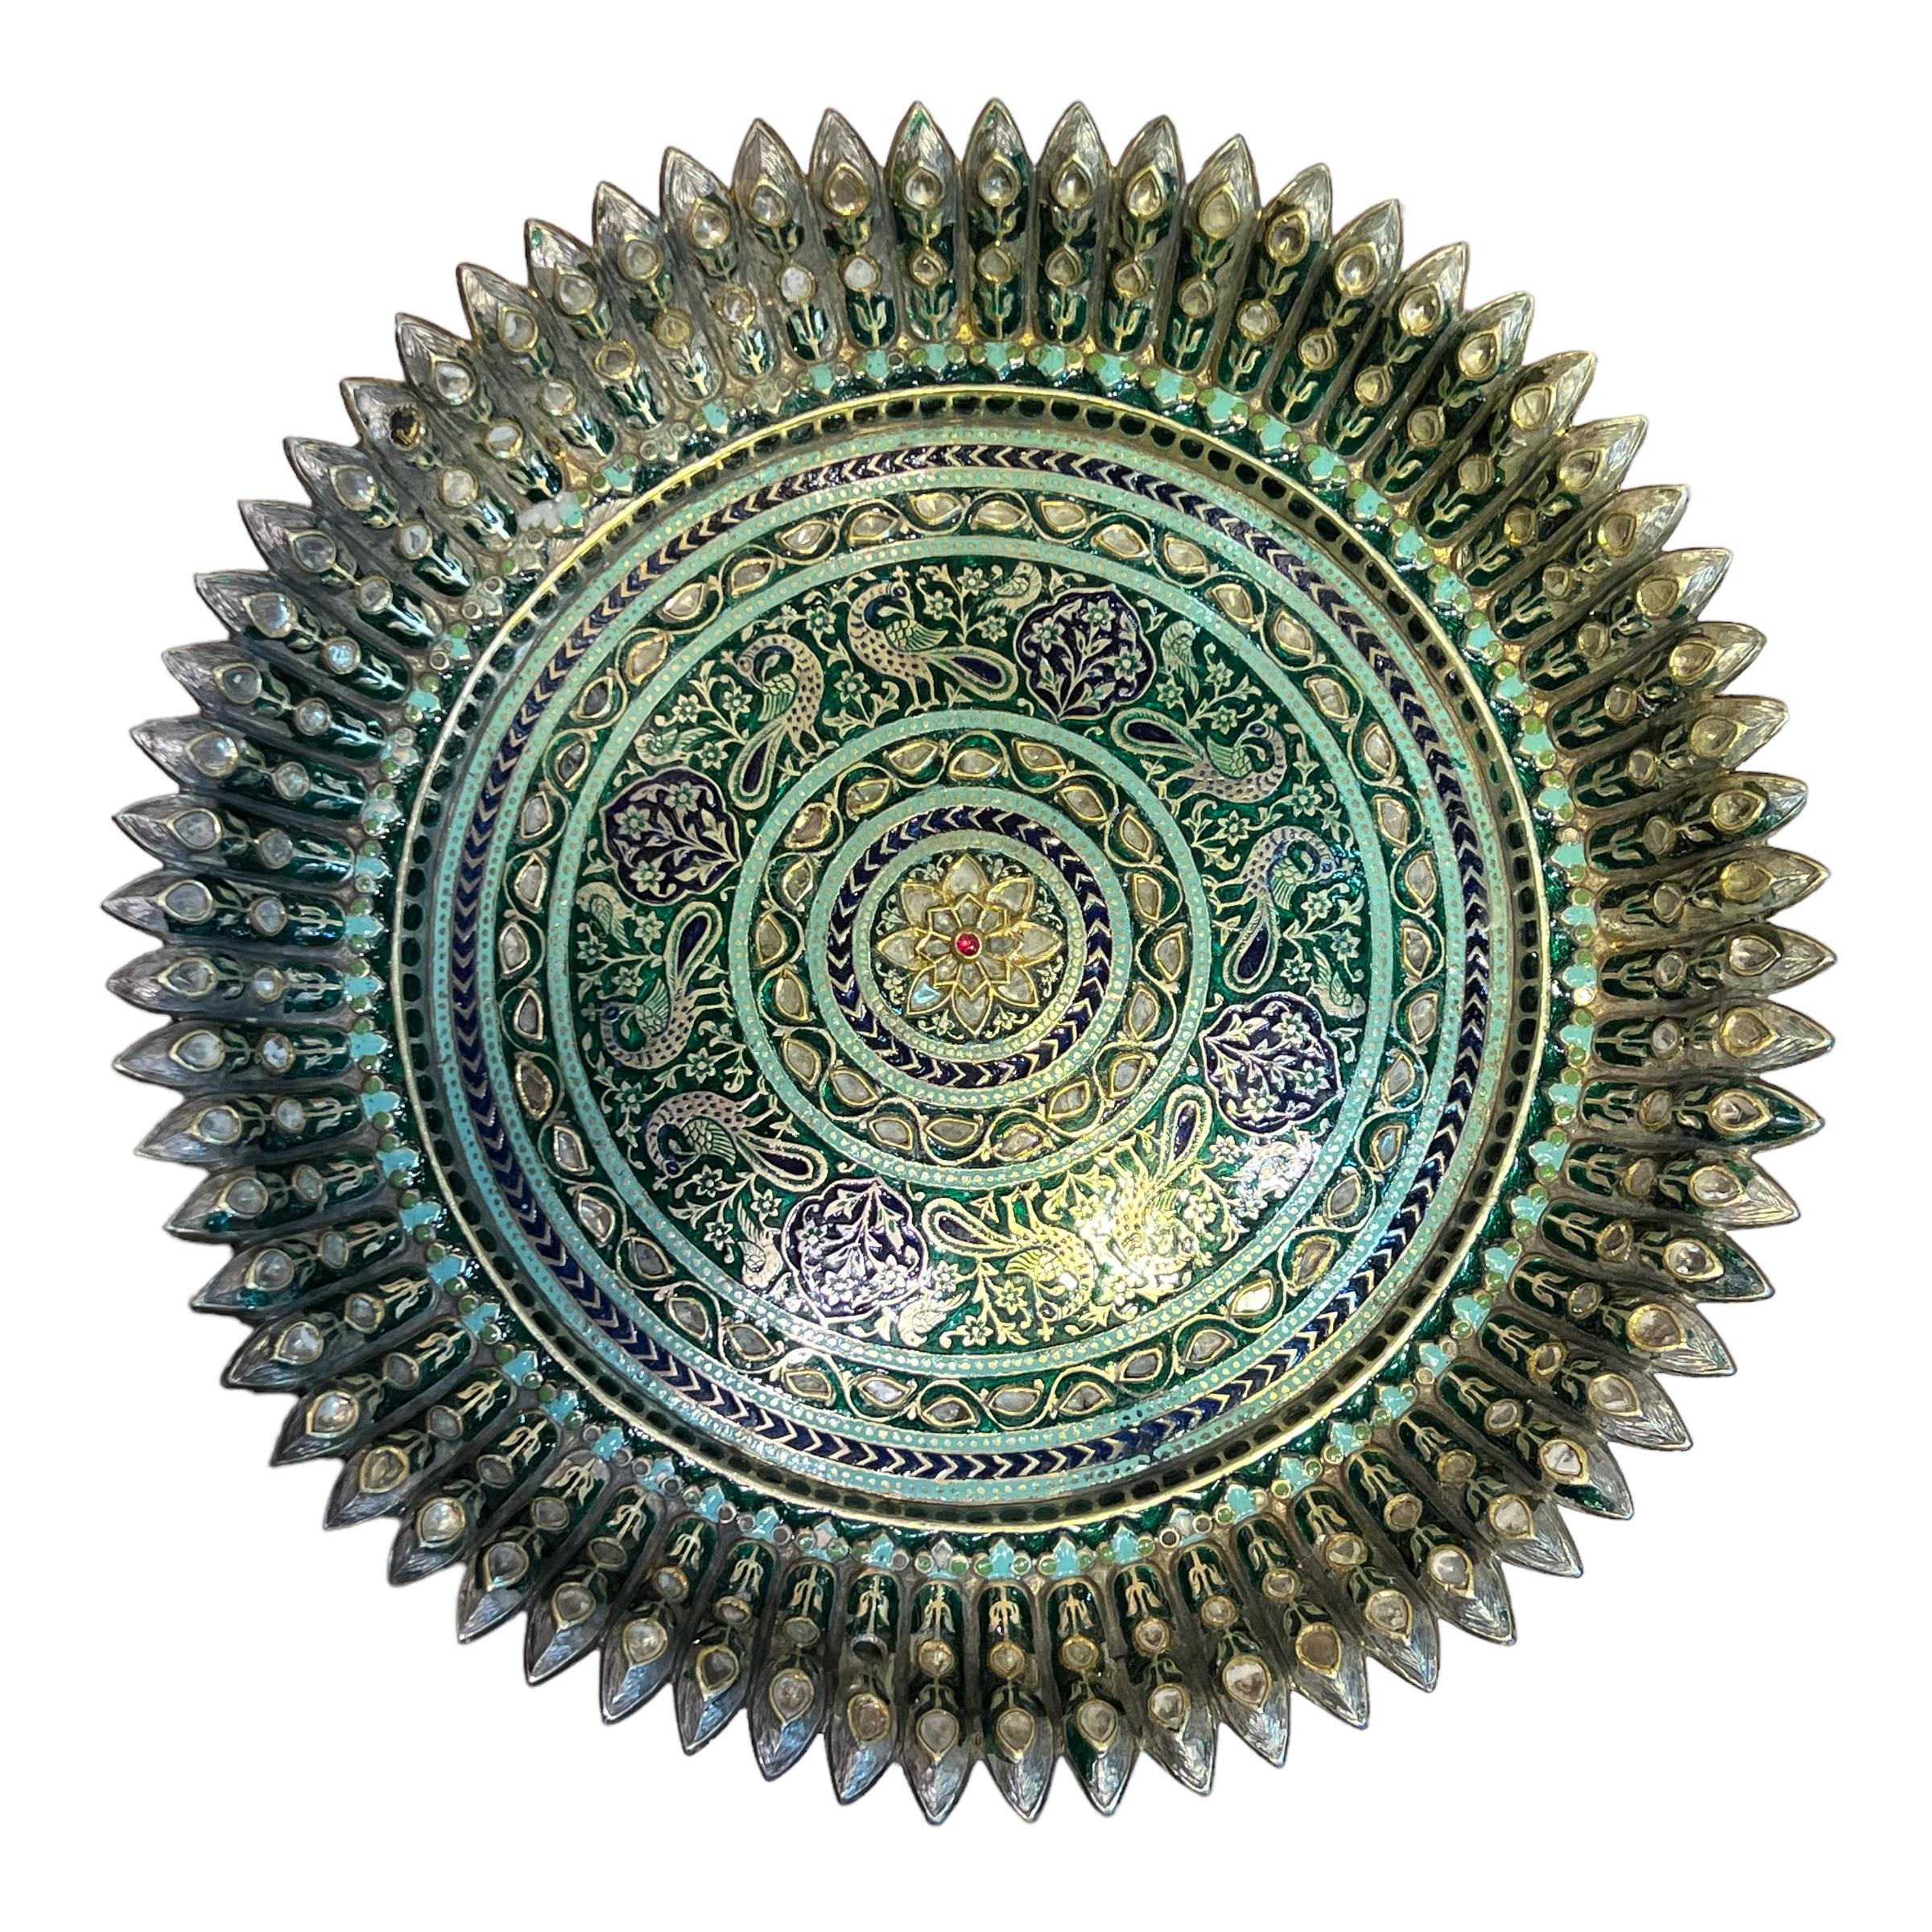 Our magnificent antique gem-set and enameled silver-gilt tazza from northern India, circa 1800, features a lotus form dish decorated with concentric rings of bird, floral and geometrical motifs in green, teal and violet enamel around a central